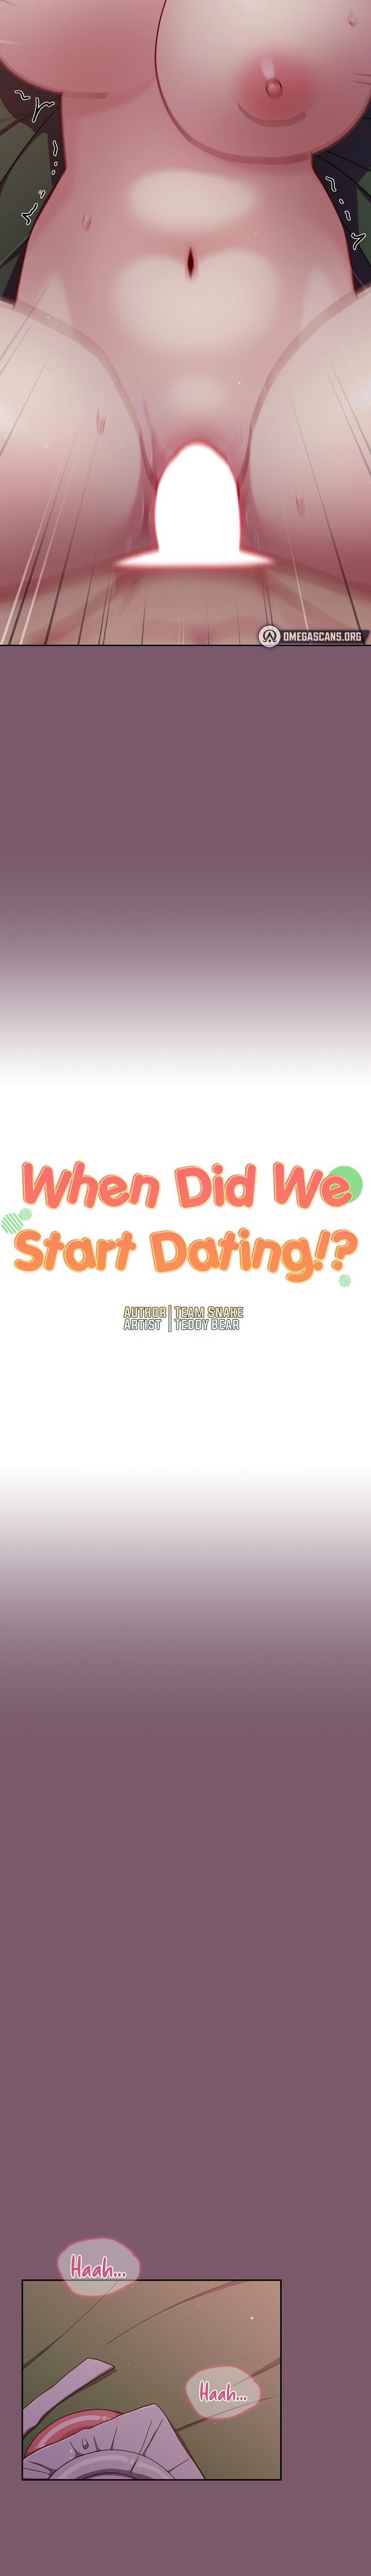 when-did-we-start-dating-chap-23-1